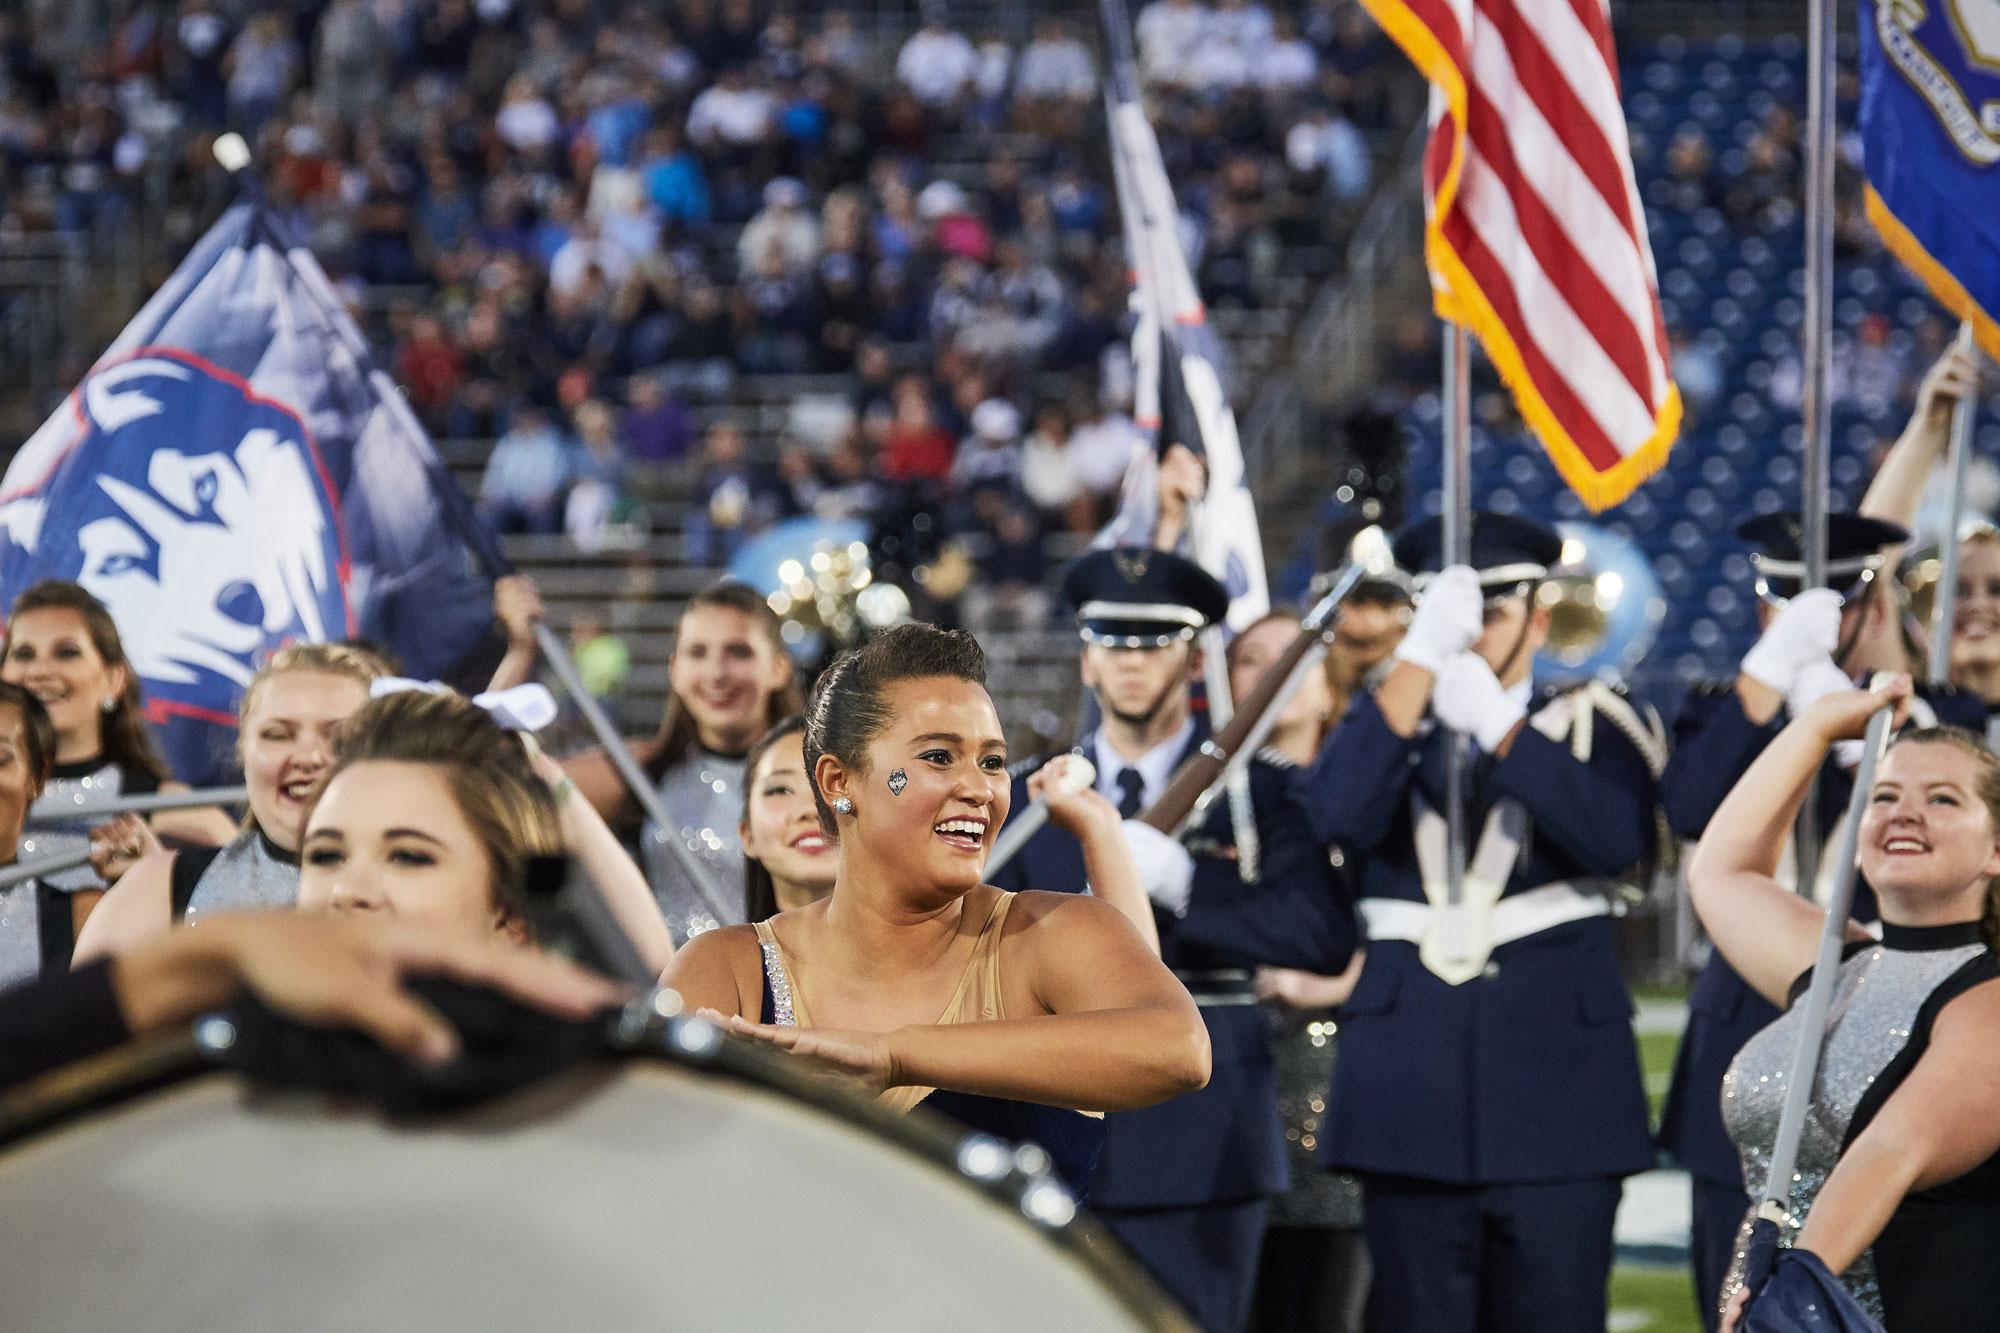 The UConn Marching Band at Rentschler Field